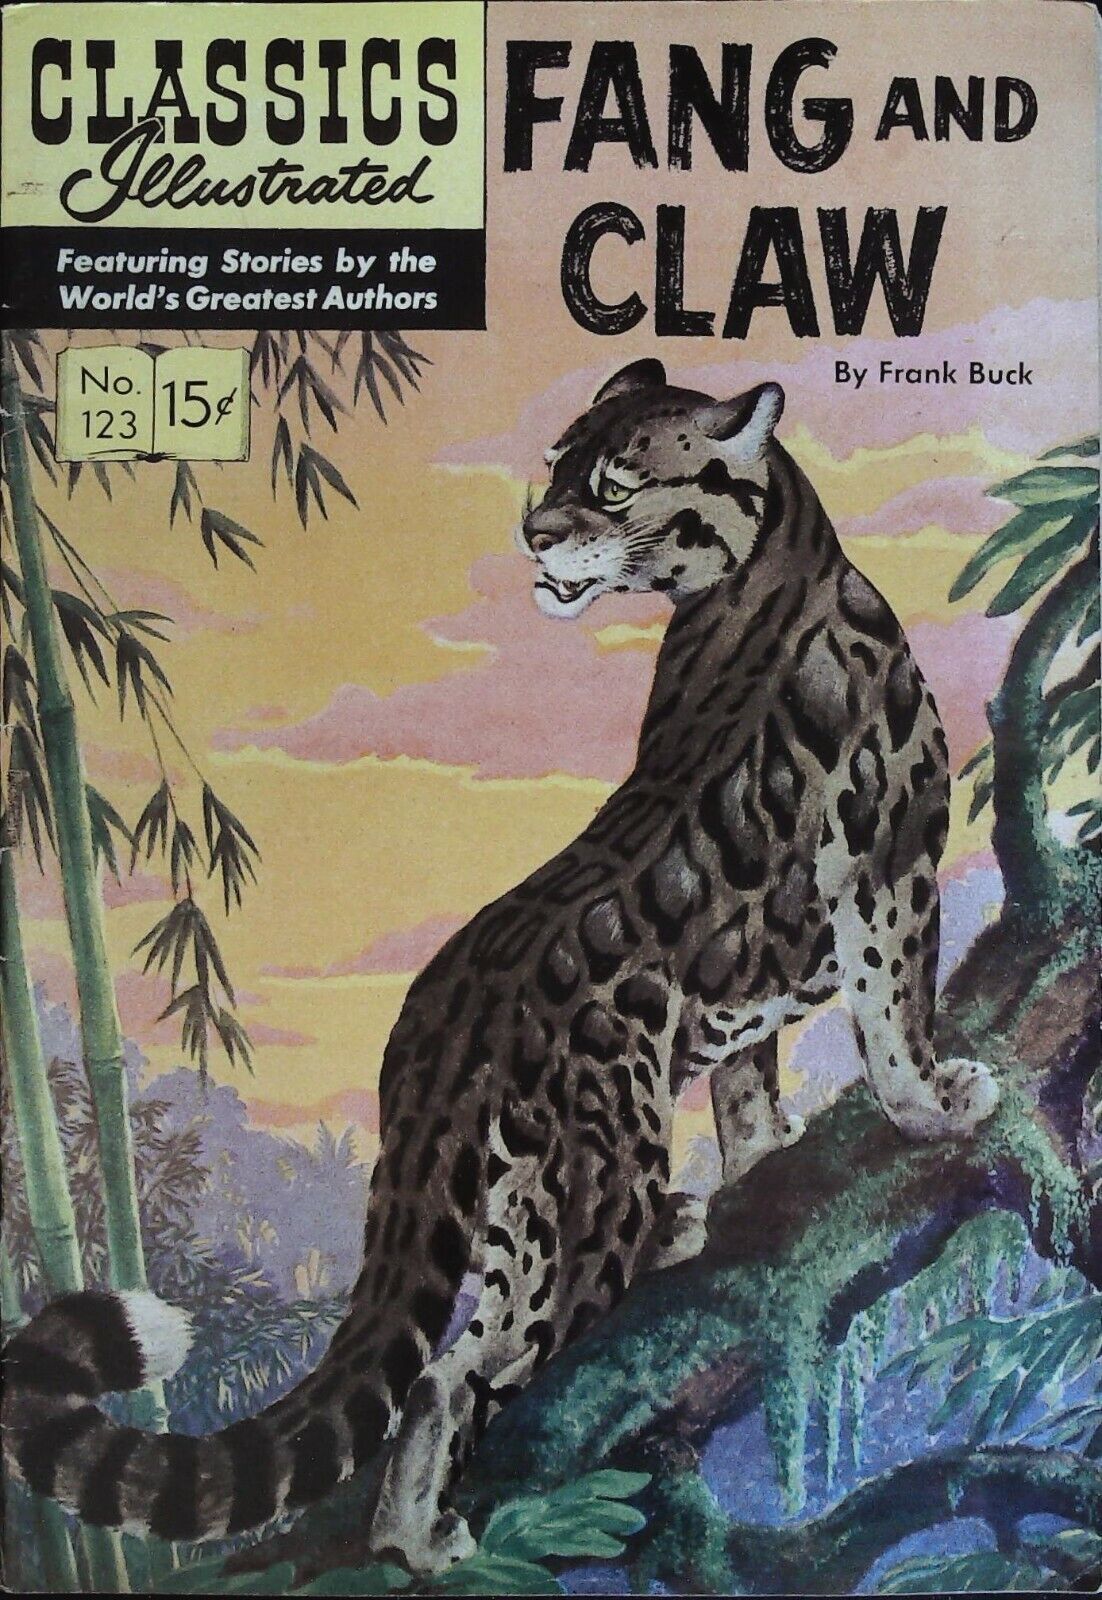 Fang and Claw Classics Illustrated #123 First Edition 1954